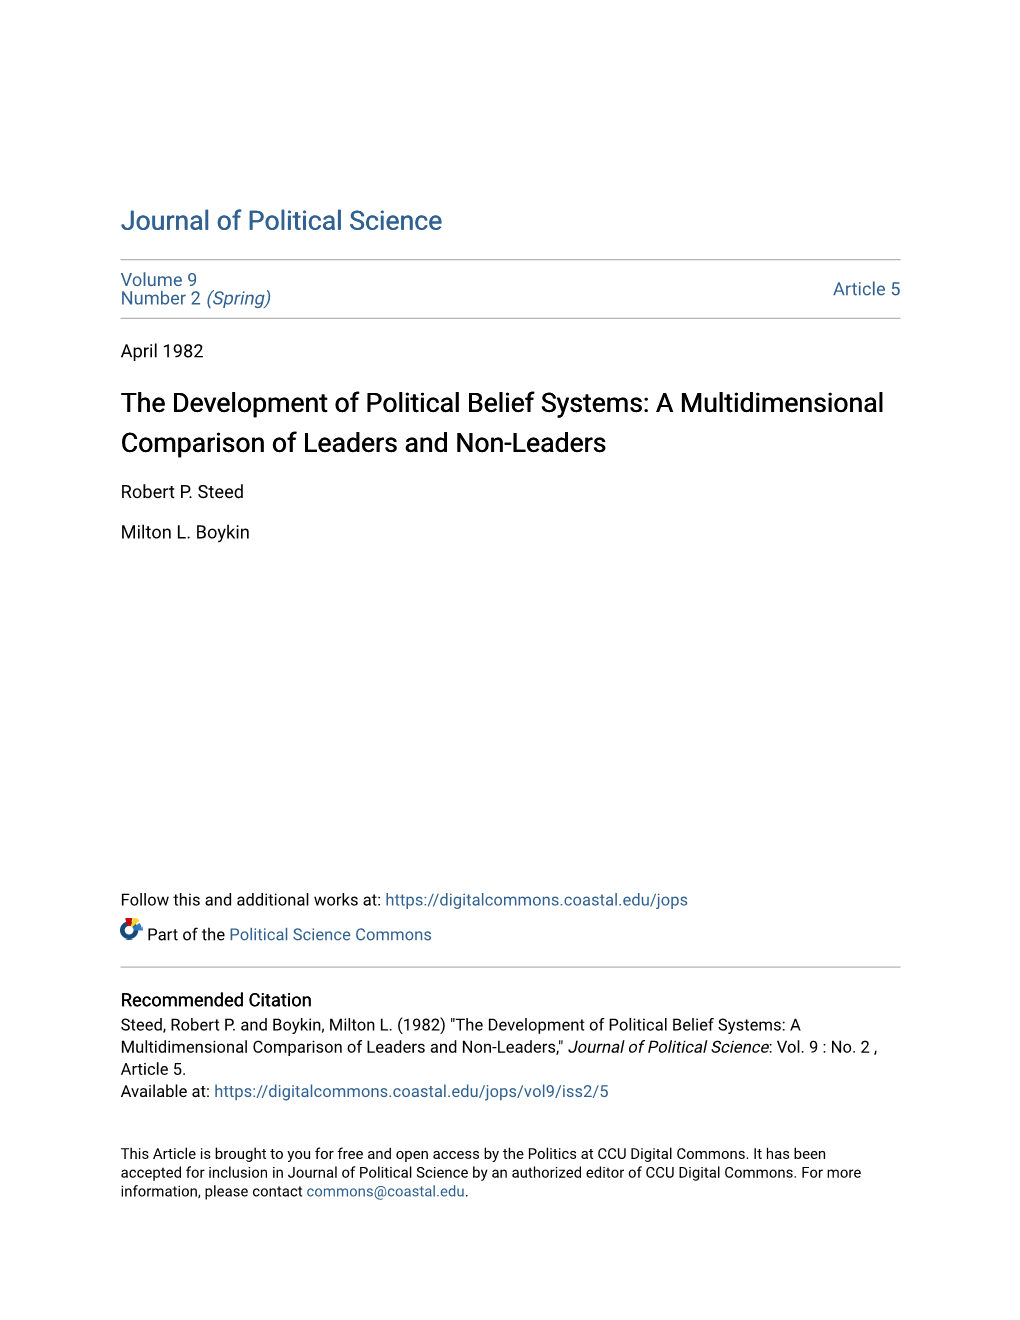 The Development of Political Belief Systems: a Multidimensional Comparison of Leaders and Non-Leaders